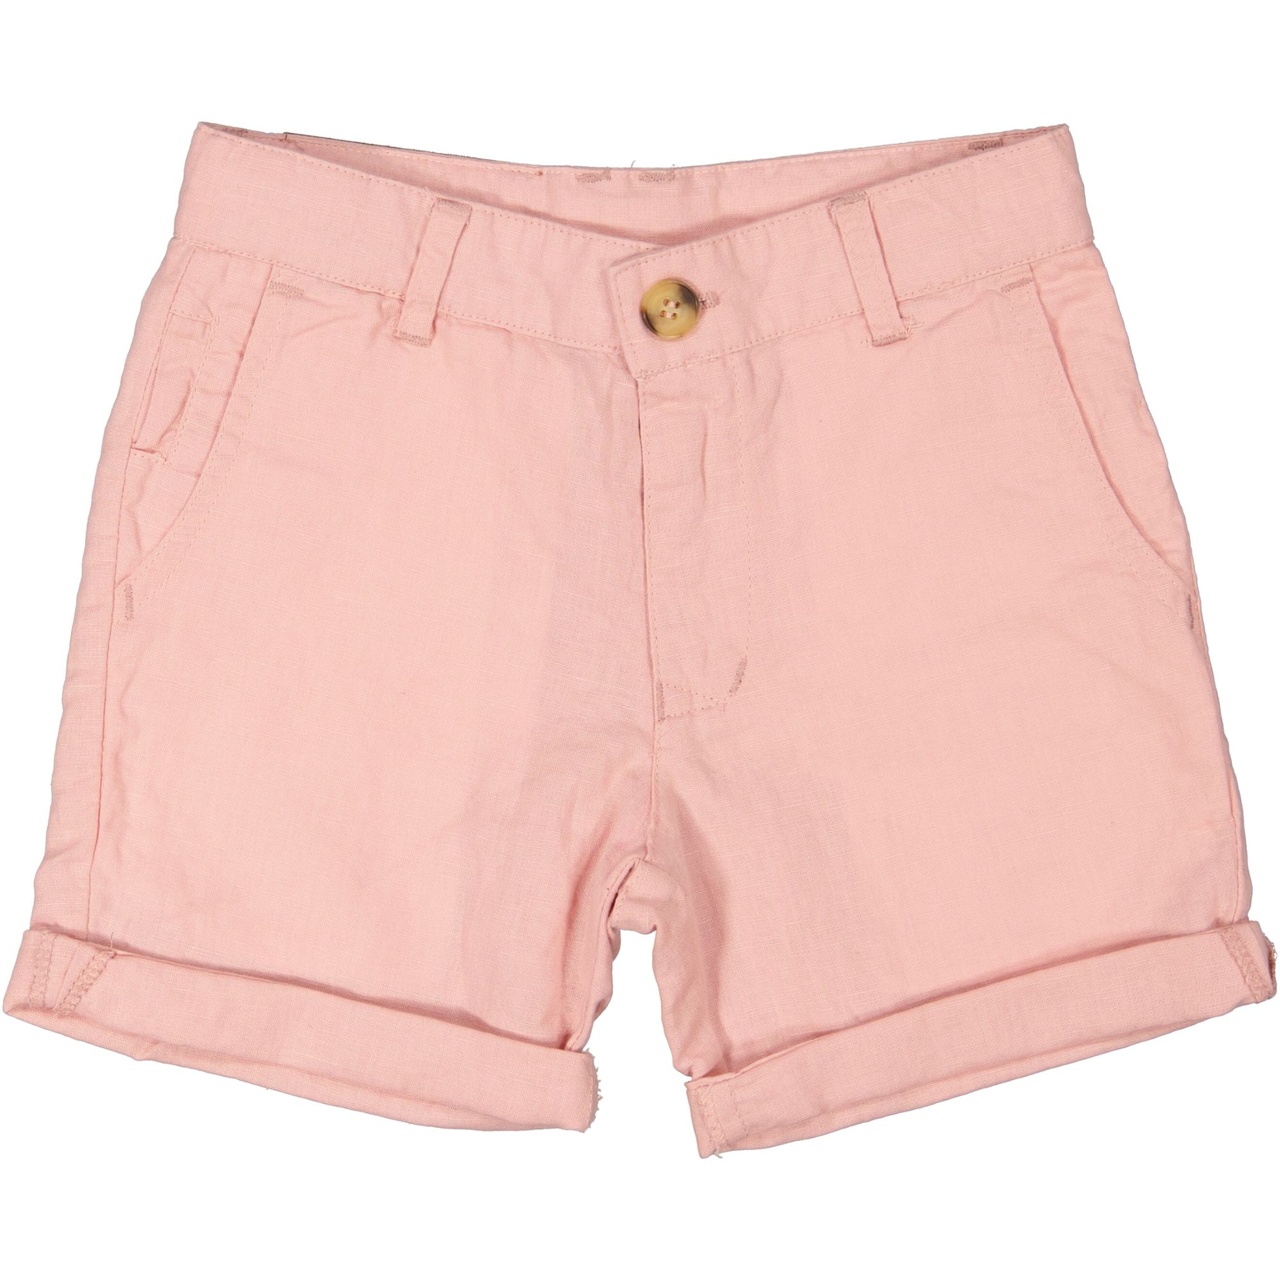 Linnen shorts Old pink 57